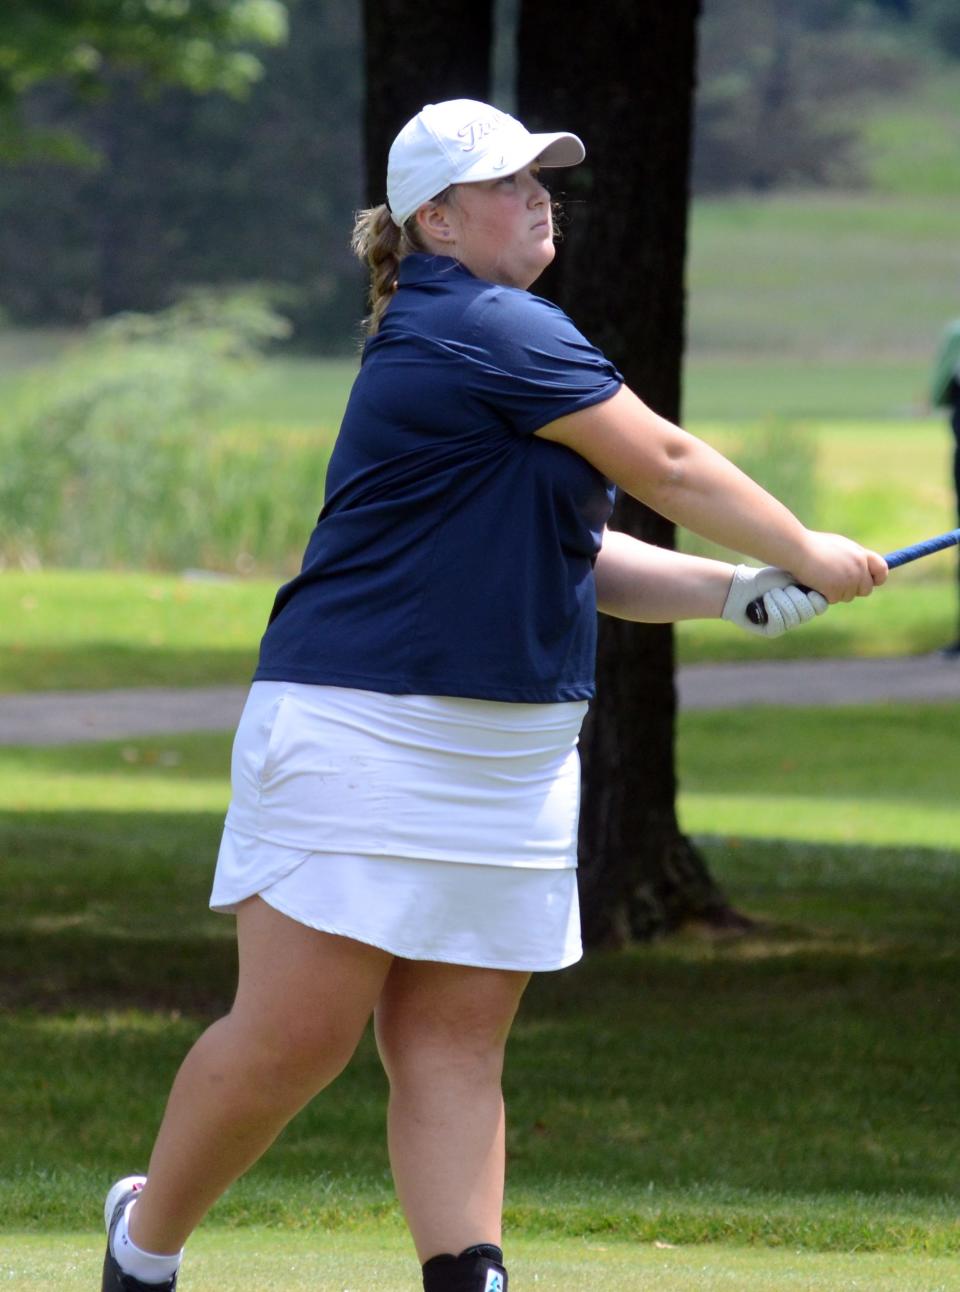 Rachel Fay of Petoskey follows her tee shot to begin Tuesday's round at The Highlands.